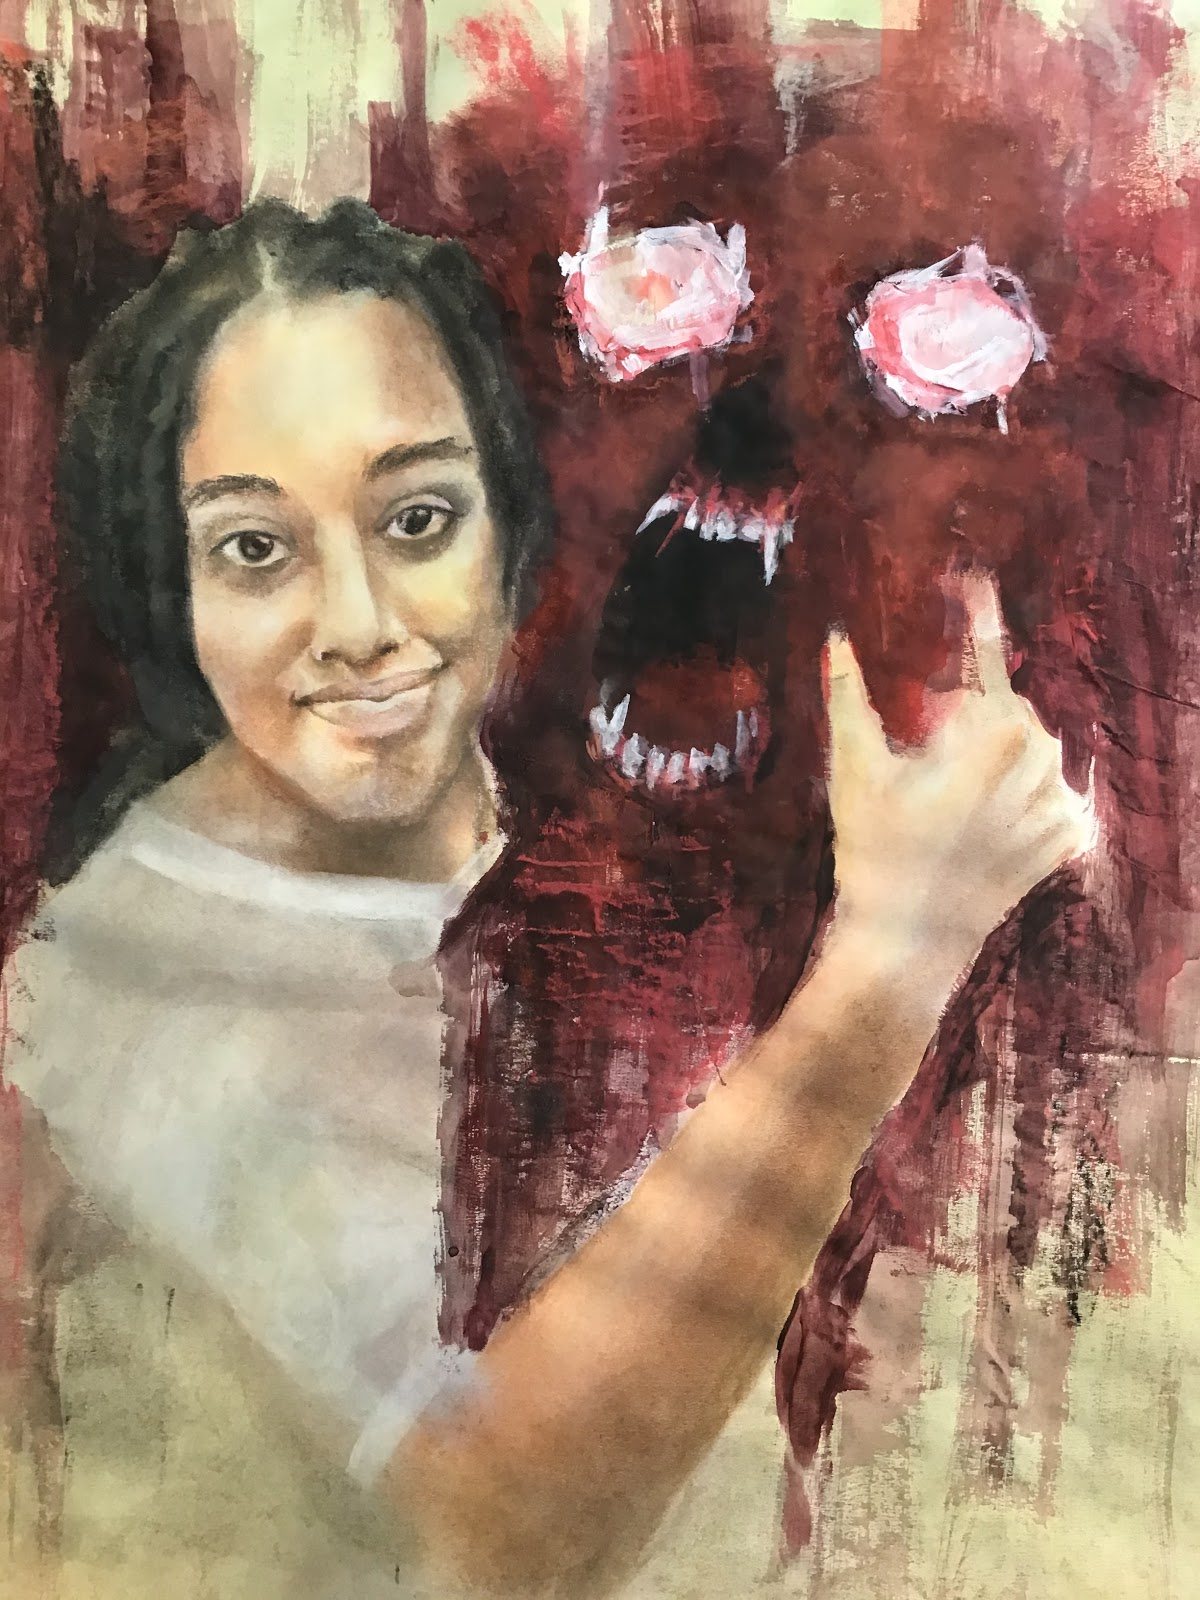 A painting of a person with a screaming figure